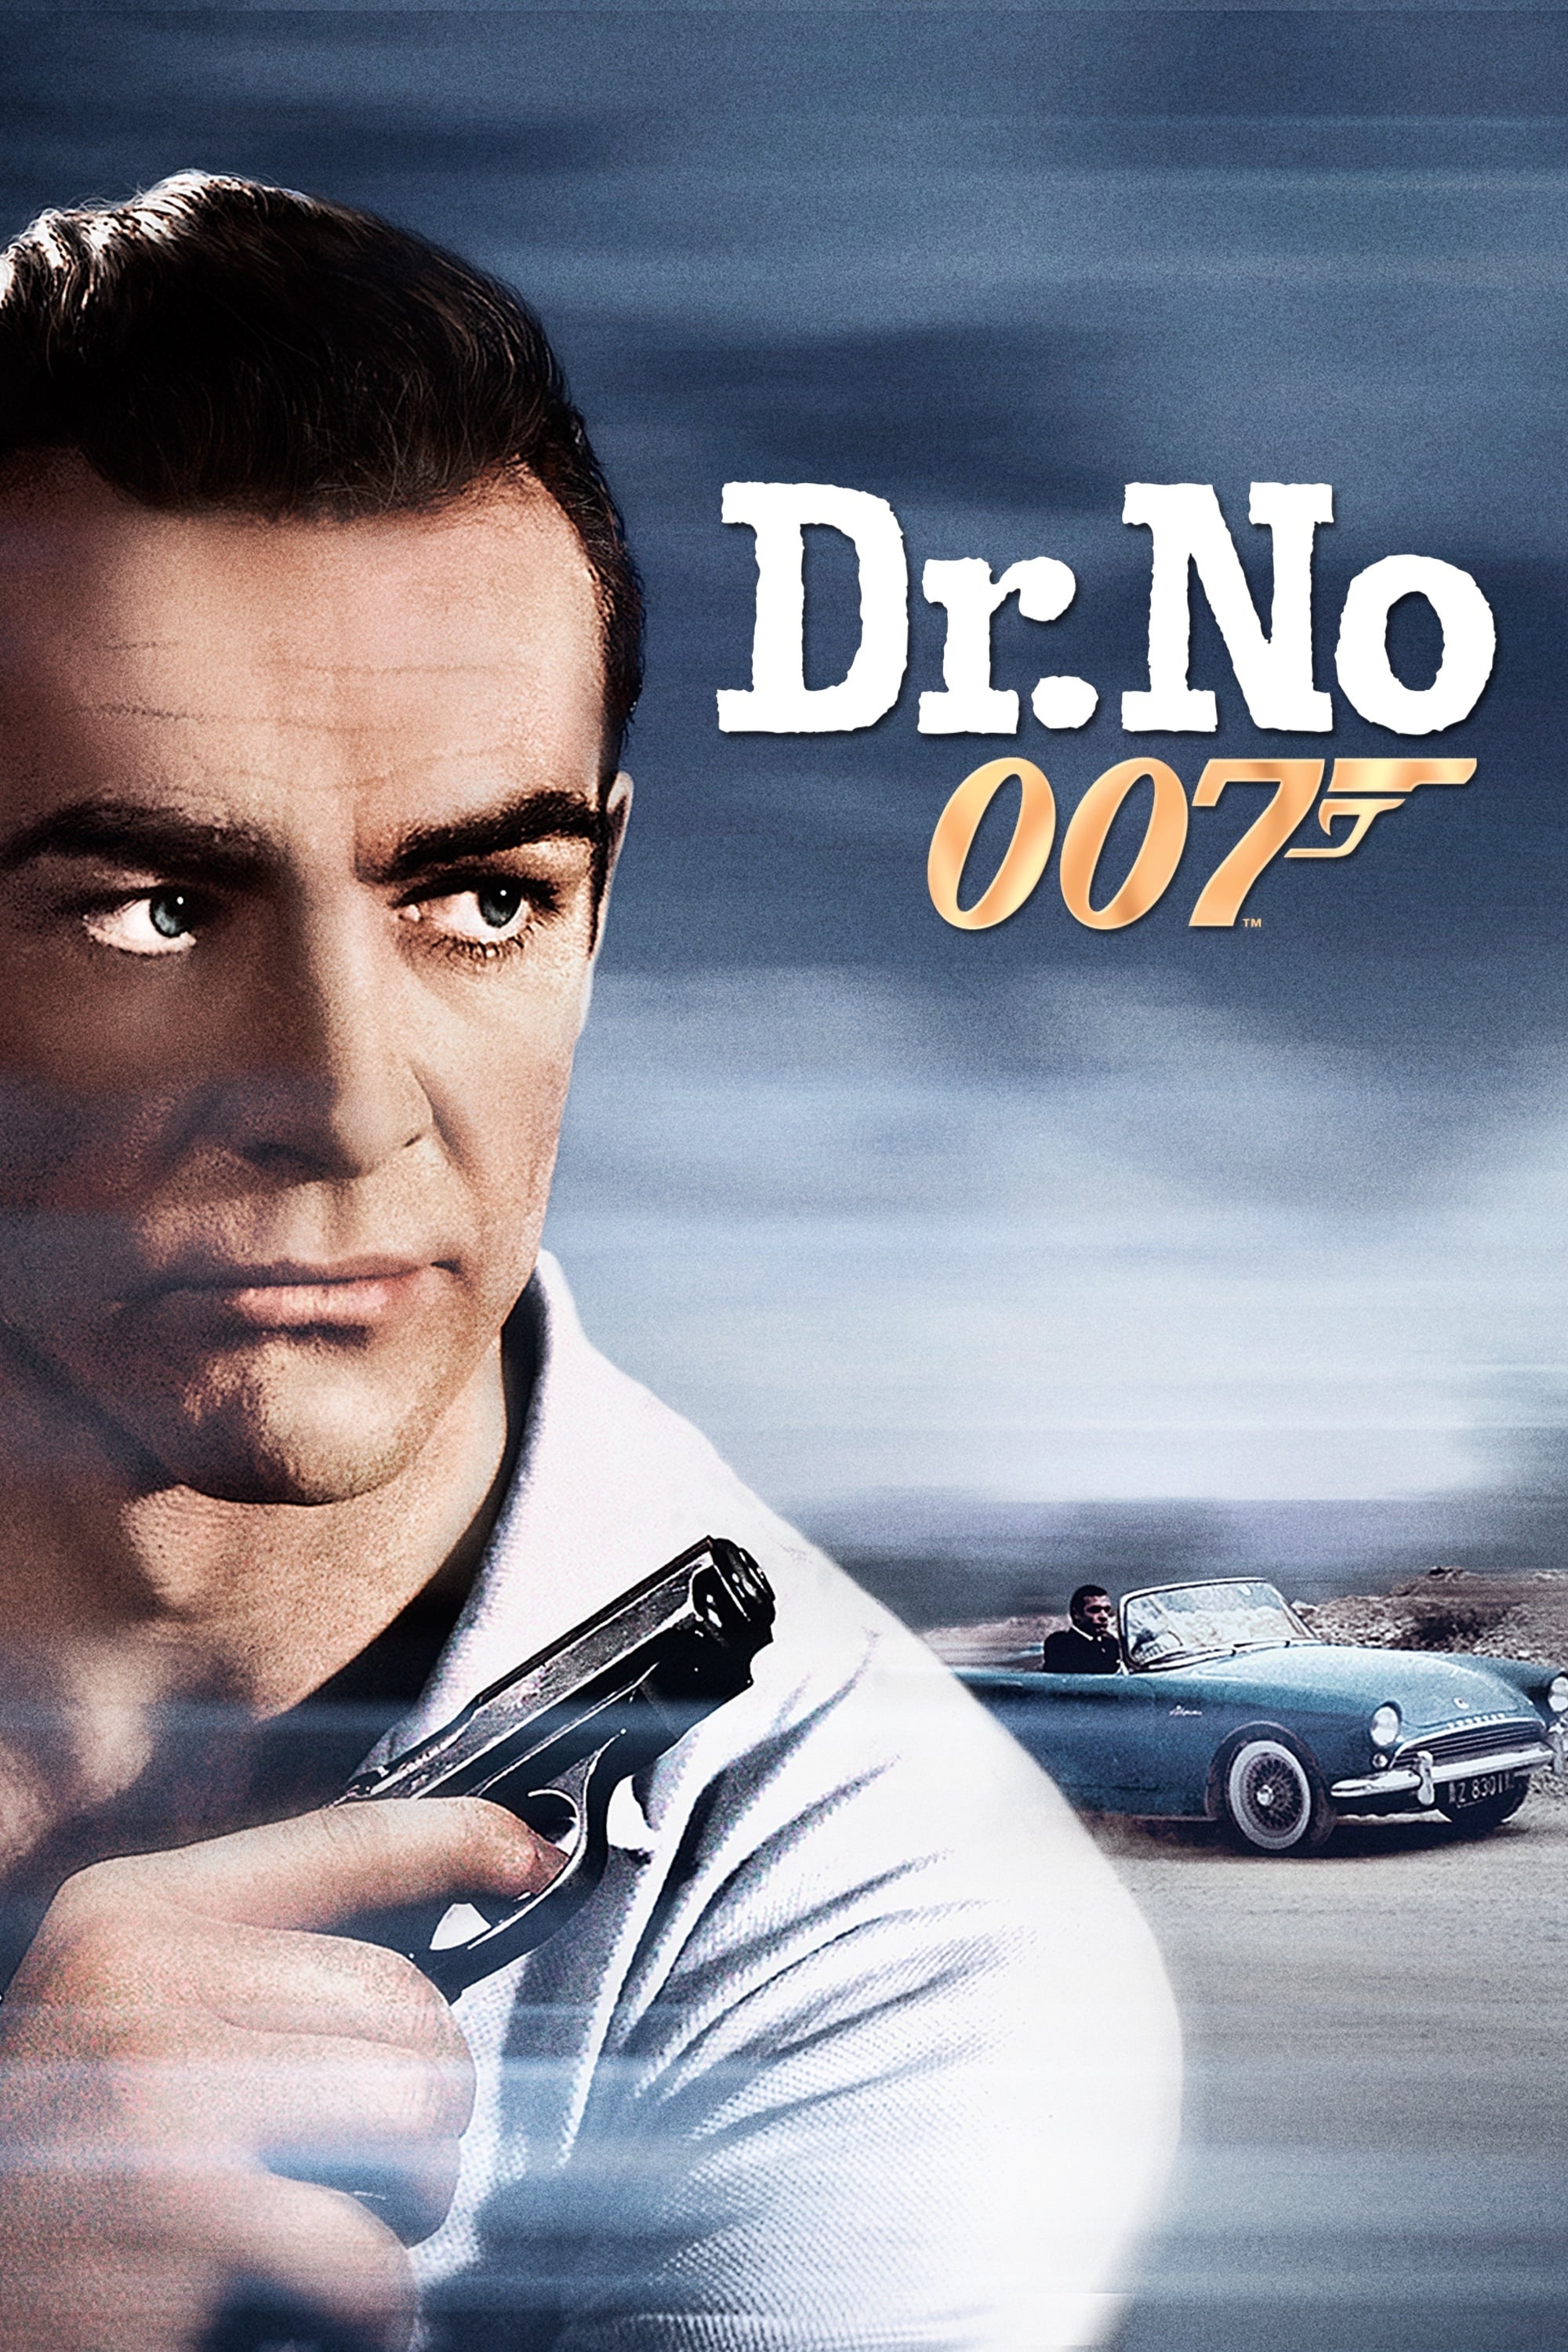 Best Sean Connery movies to watch on Amazon or iTunes